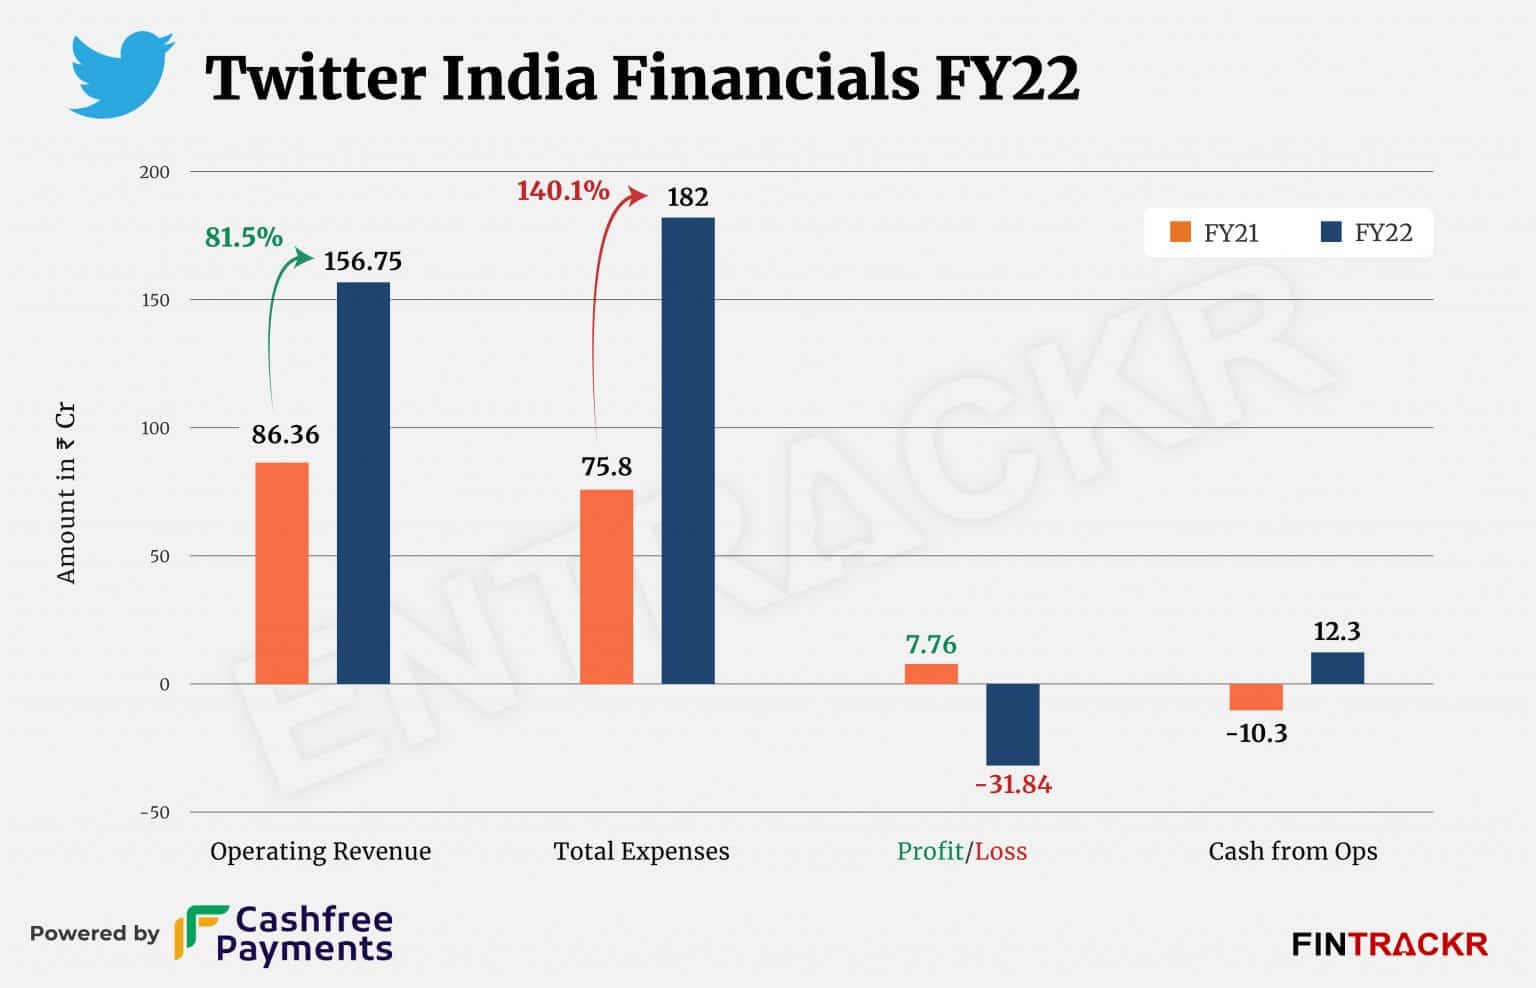 Twitter India slips into losses in FY22 with 82 growth in revenue